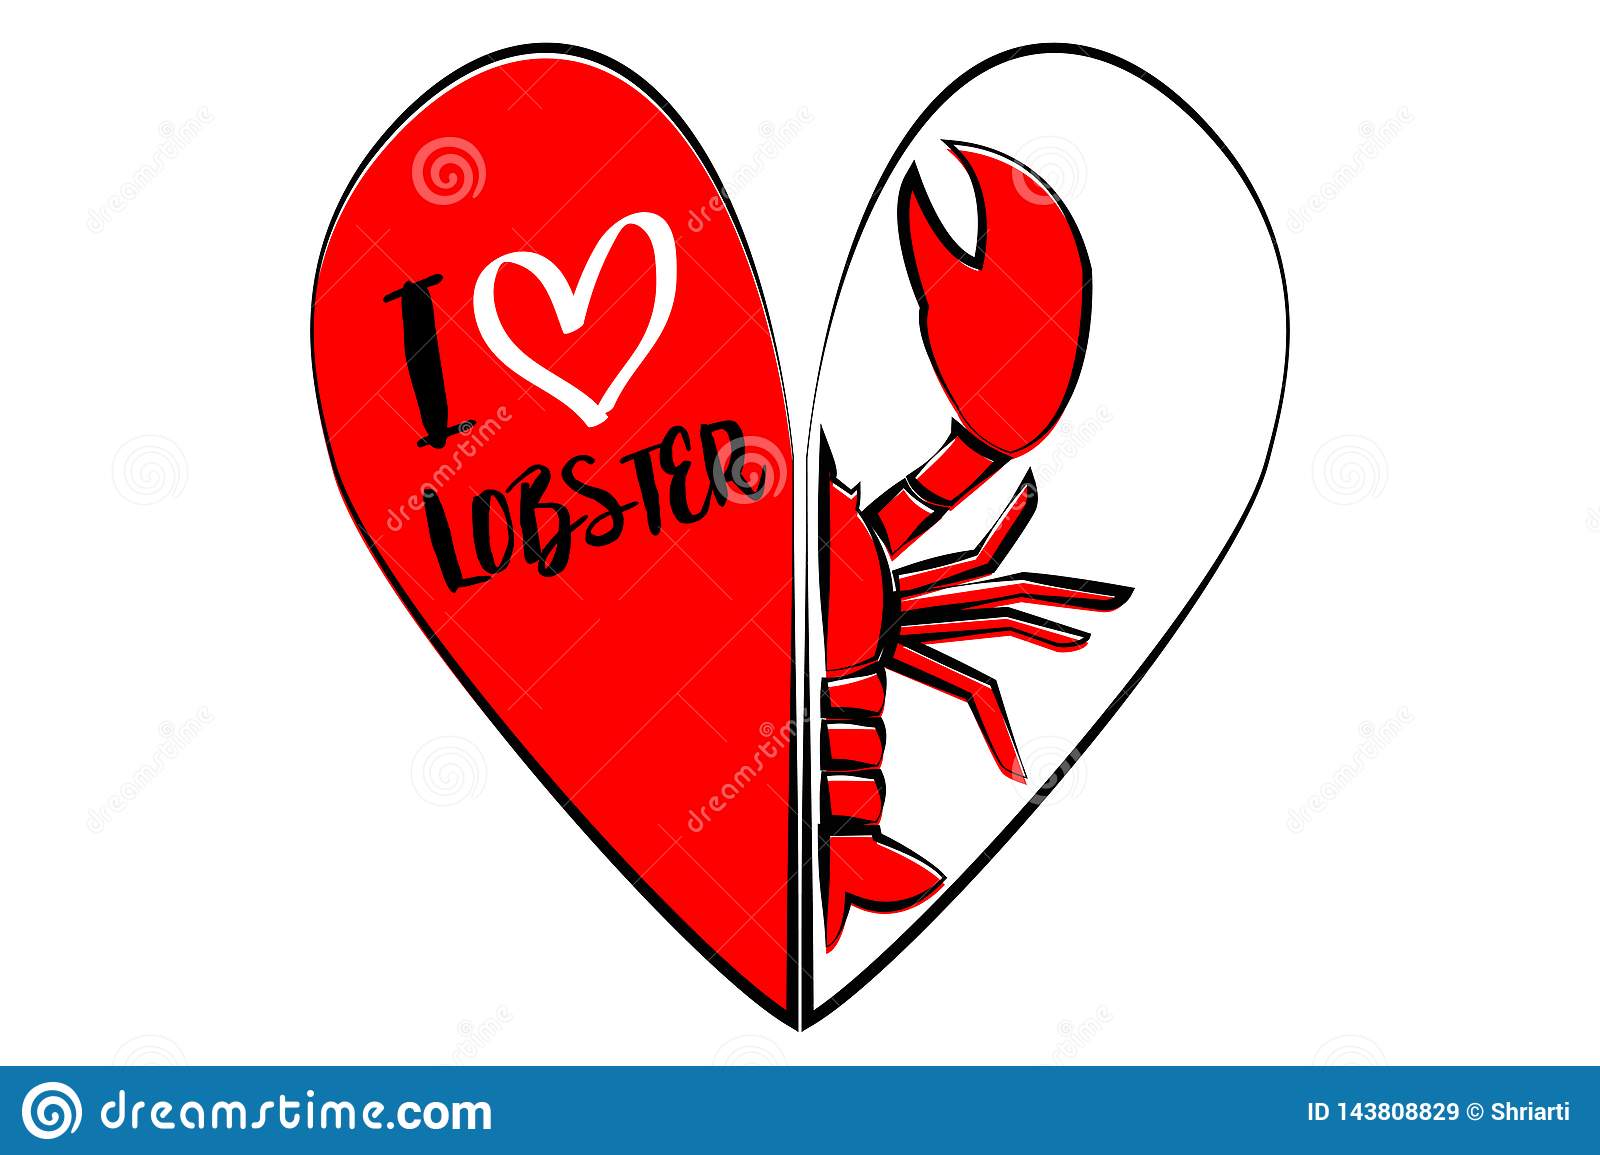 Luvin' Lobster